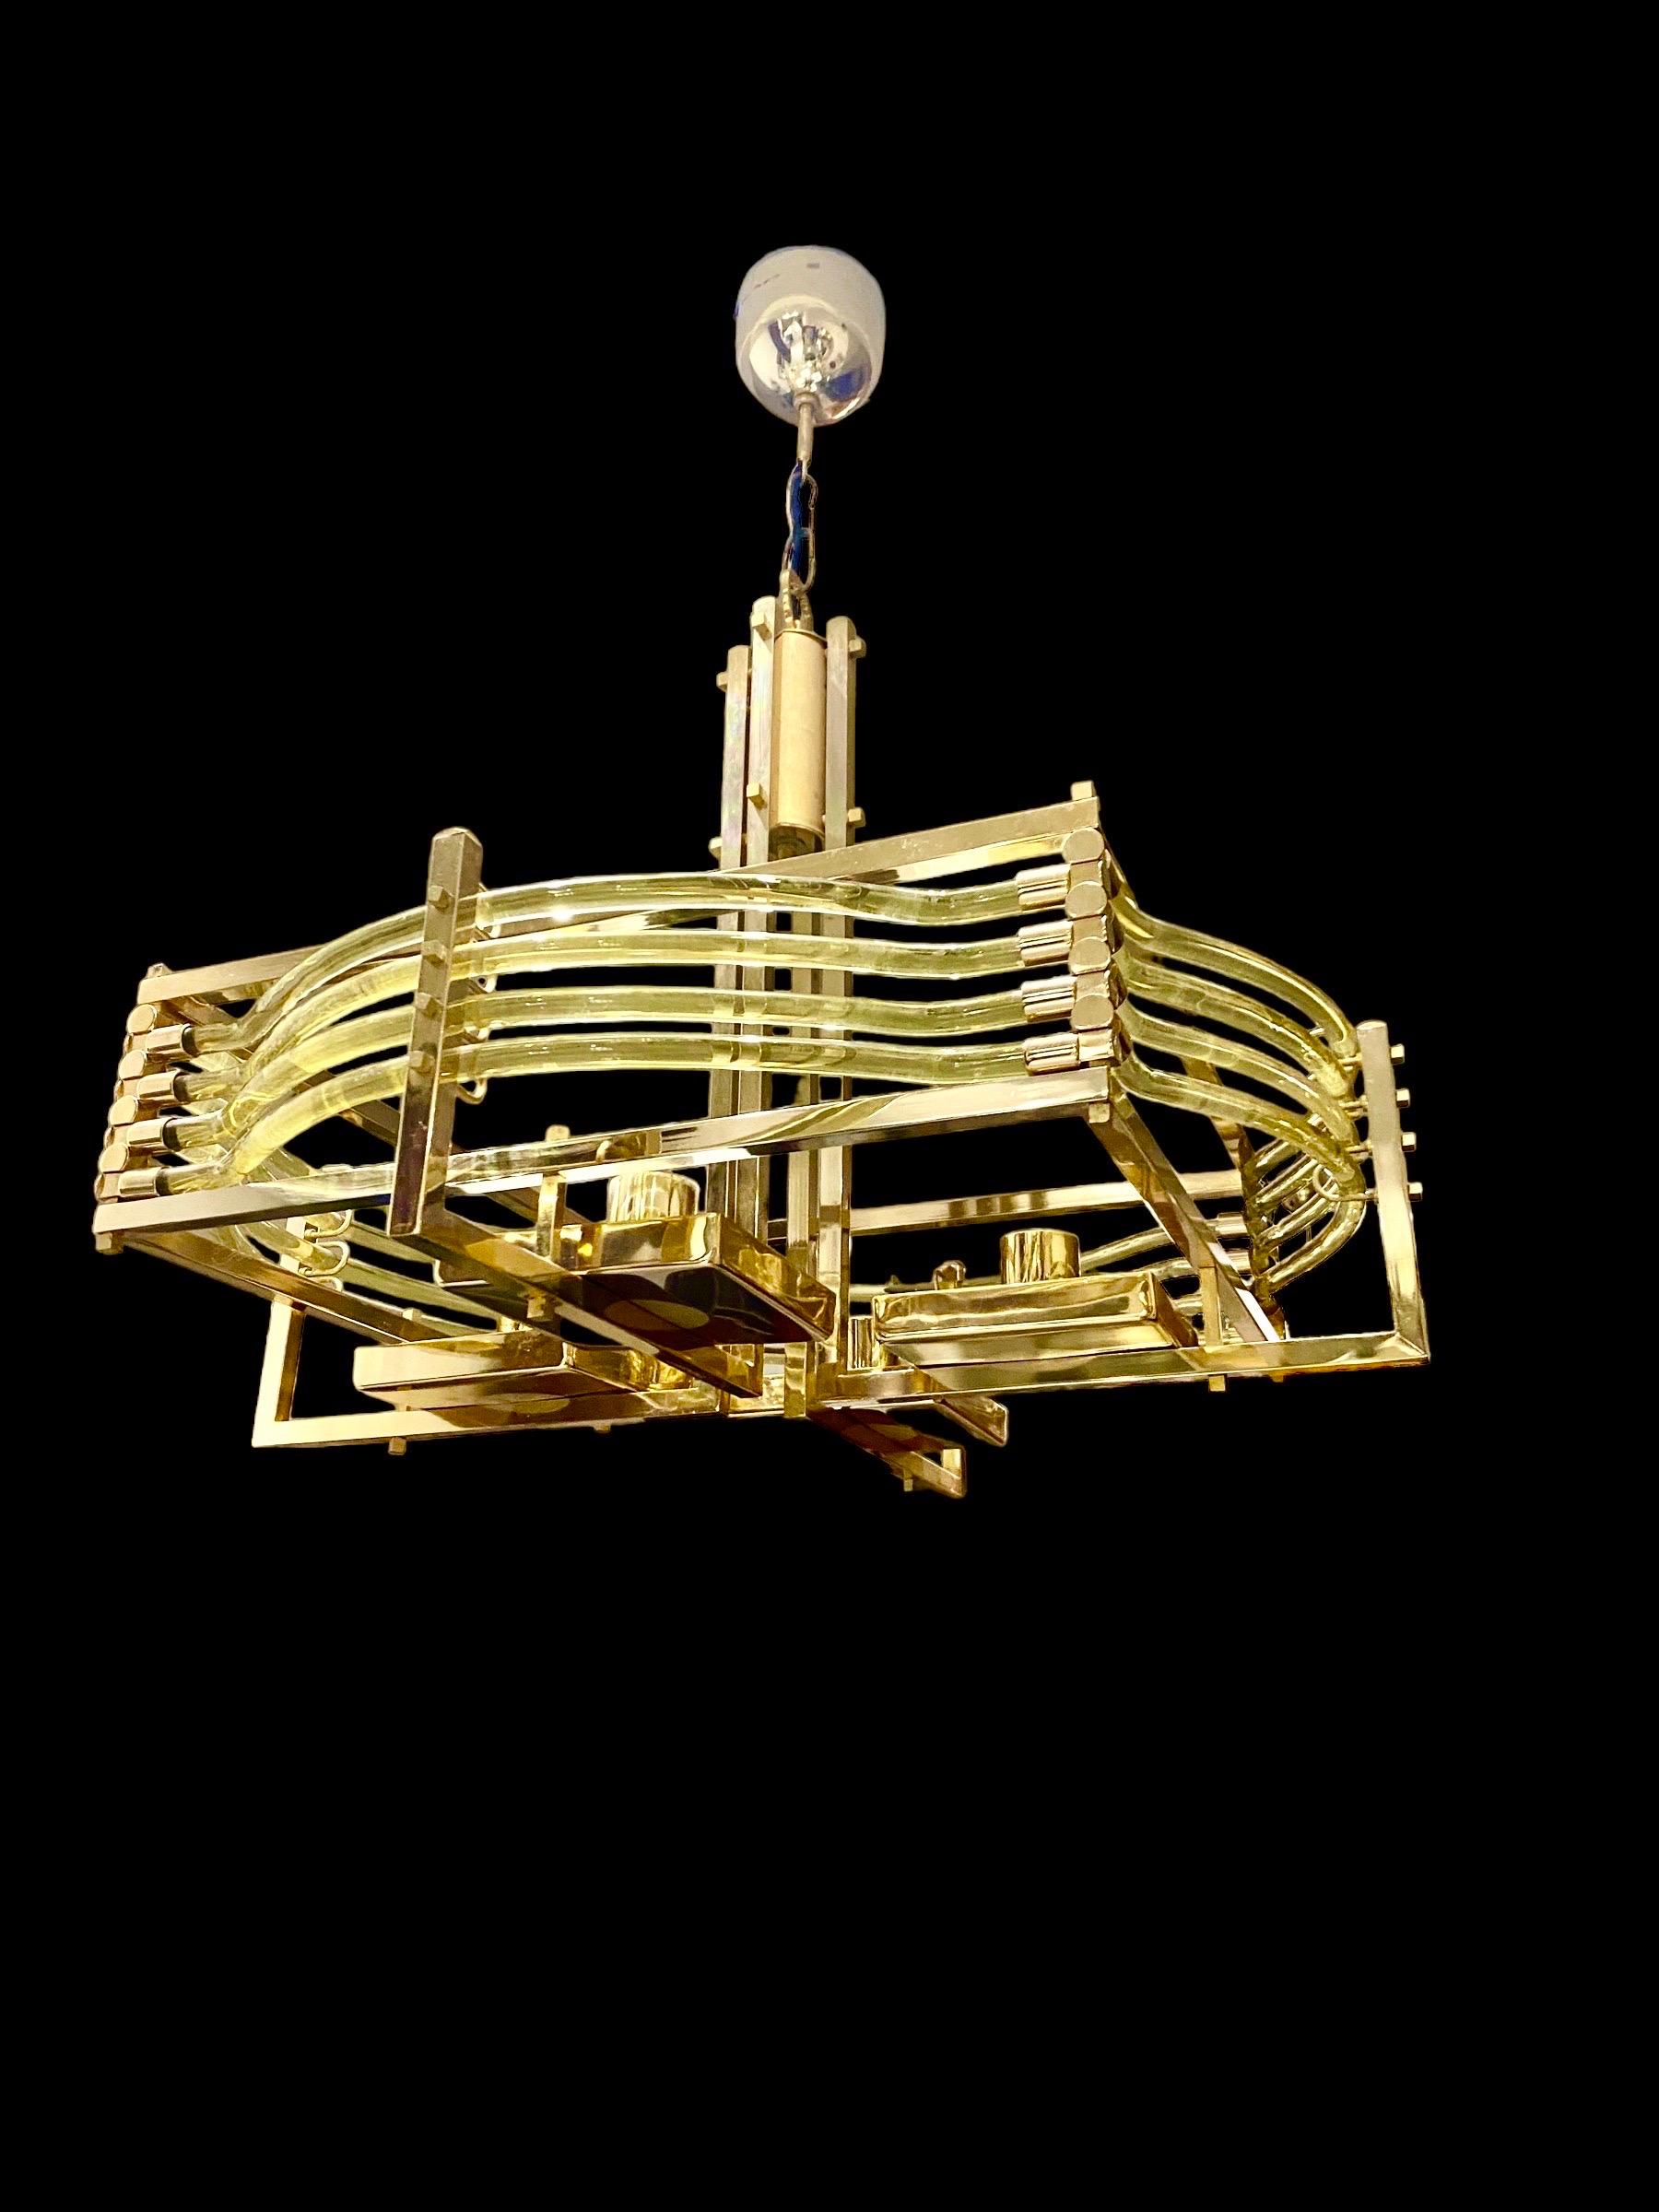 Exceptional Gaetano Sciolari with yellow glass Murano oversized with gilt gold structure. The Design and the quality of the glass make this piece the best of the italian Design.
This unique Model in Gold with yellow glass murano are exceptional